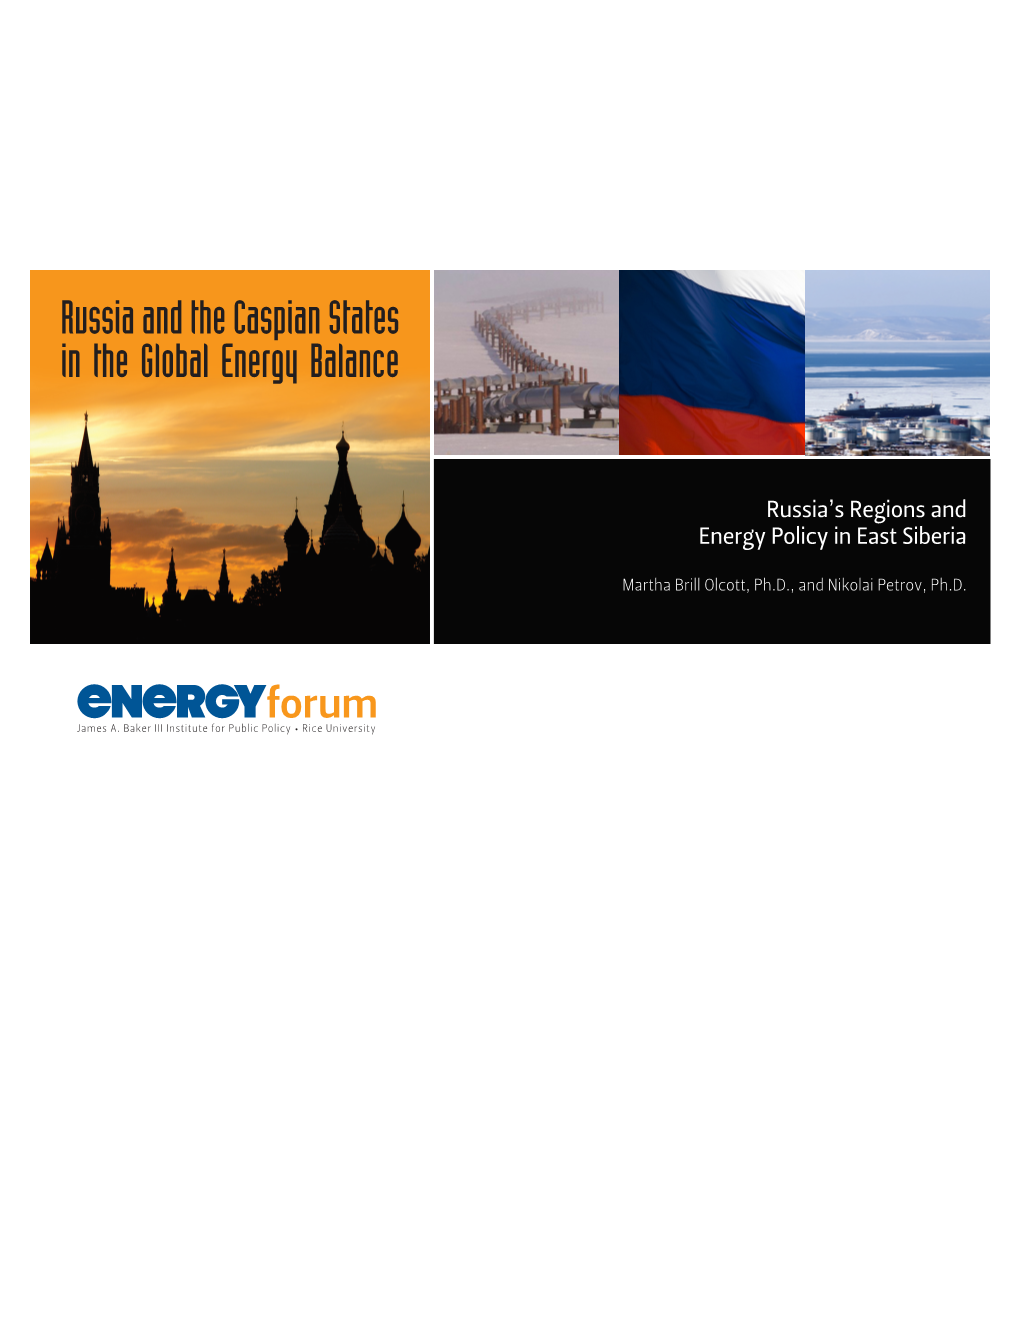 Russia and the Caspian States in the Global Energy Balance